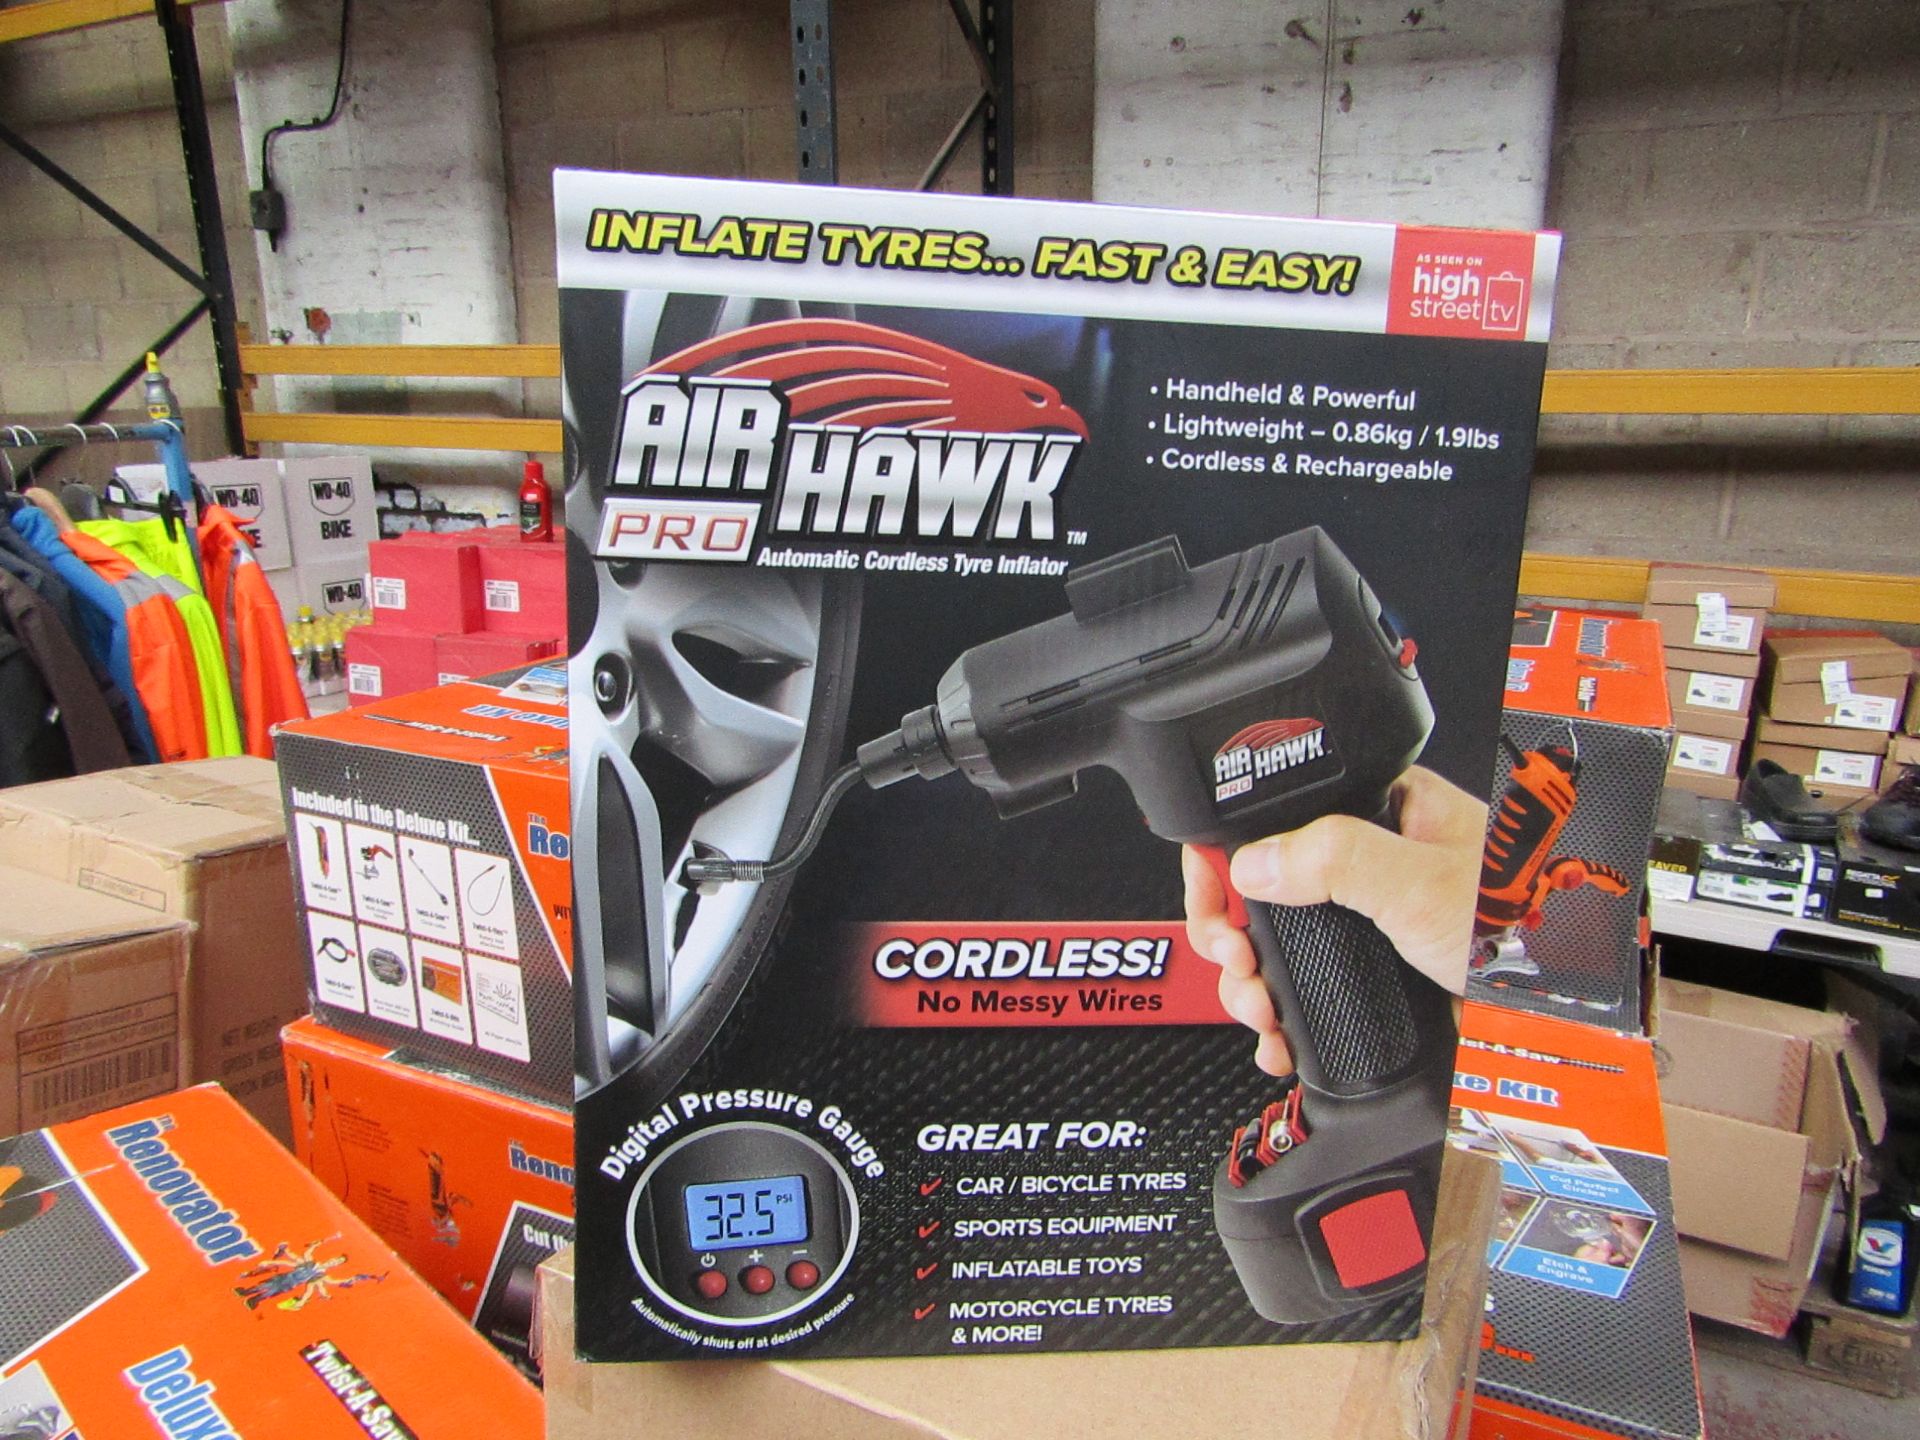 | 1X | AIR HAWK PRO | NEW AND SEALED | SKU C5060191466837 | NO ONLINE RESALE | RRP £49.99 |